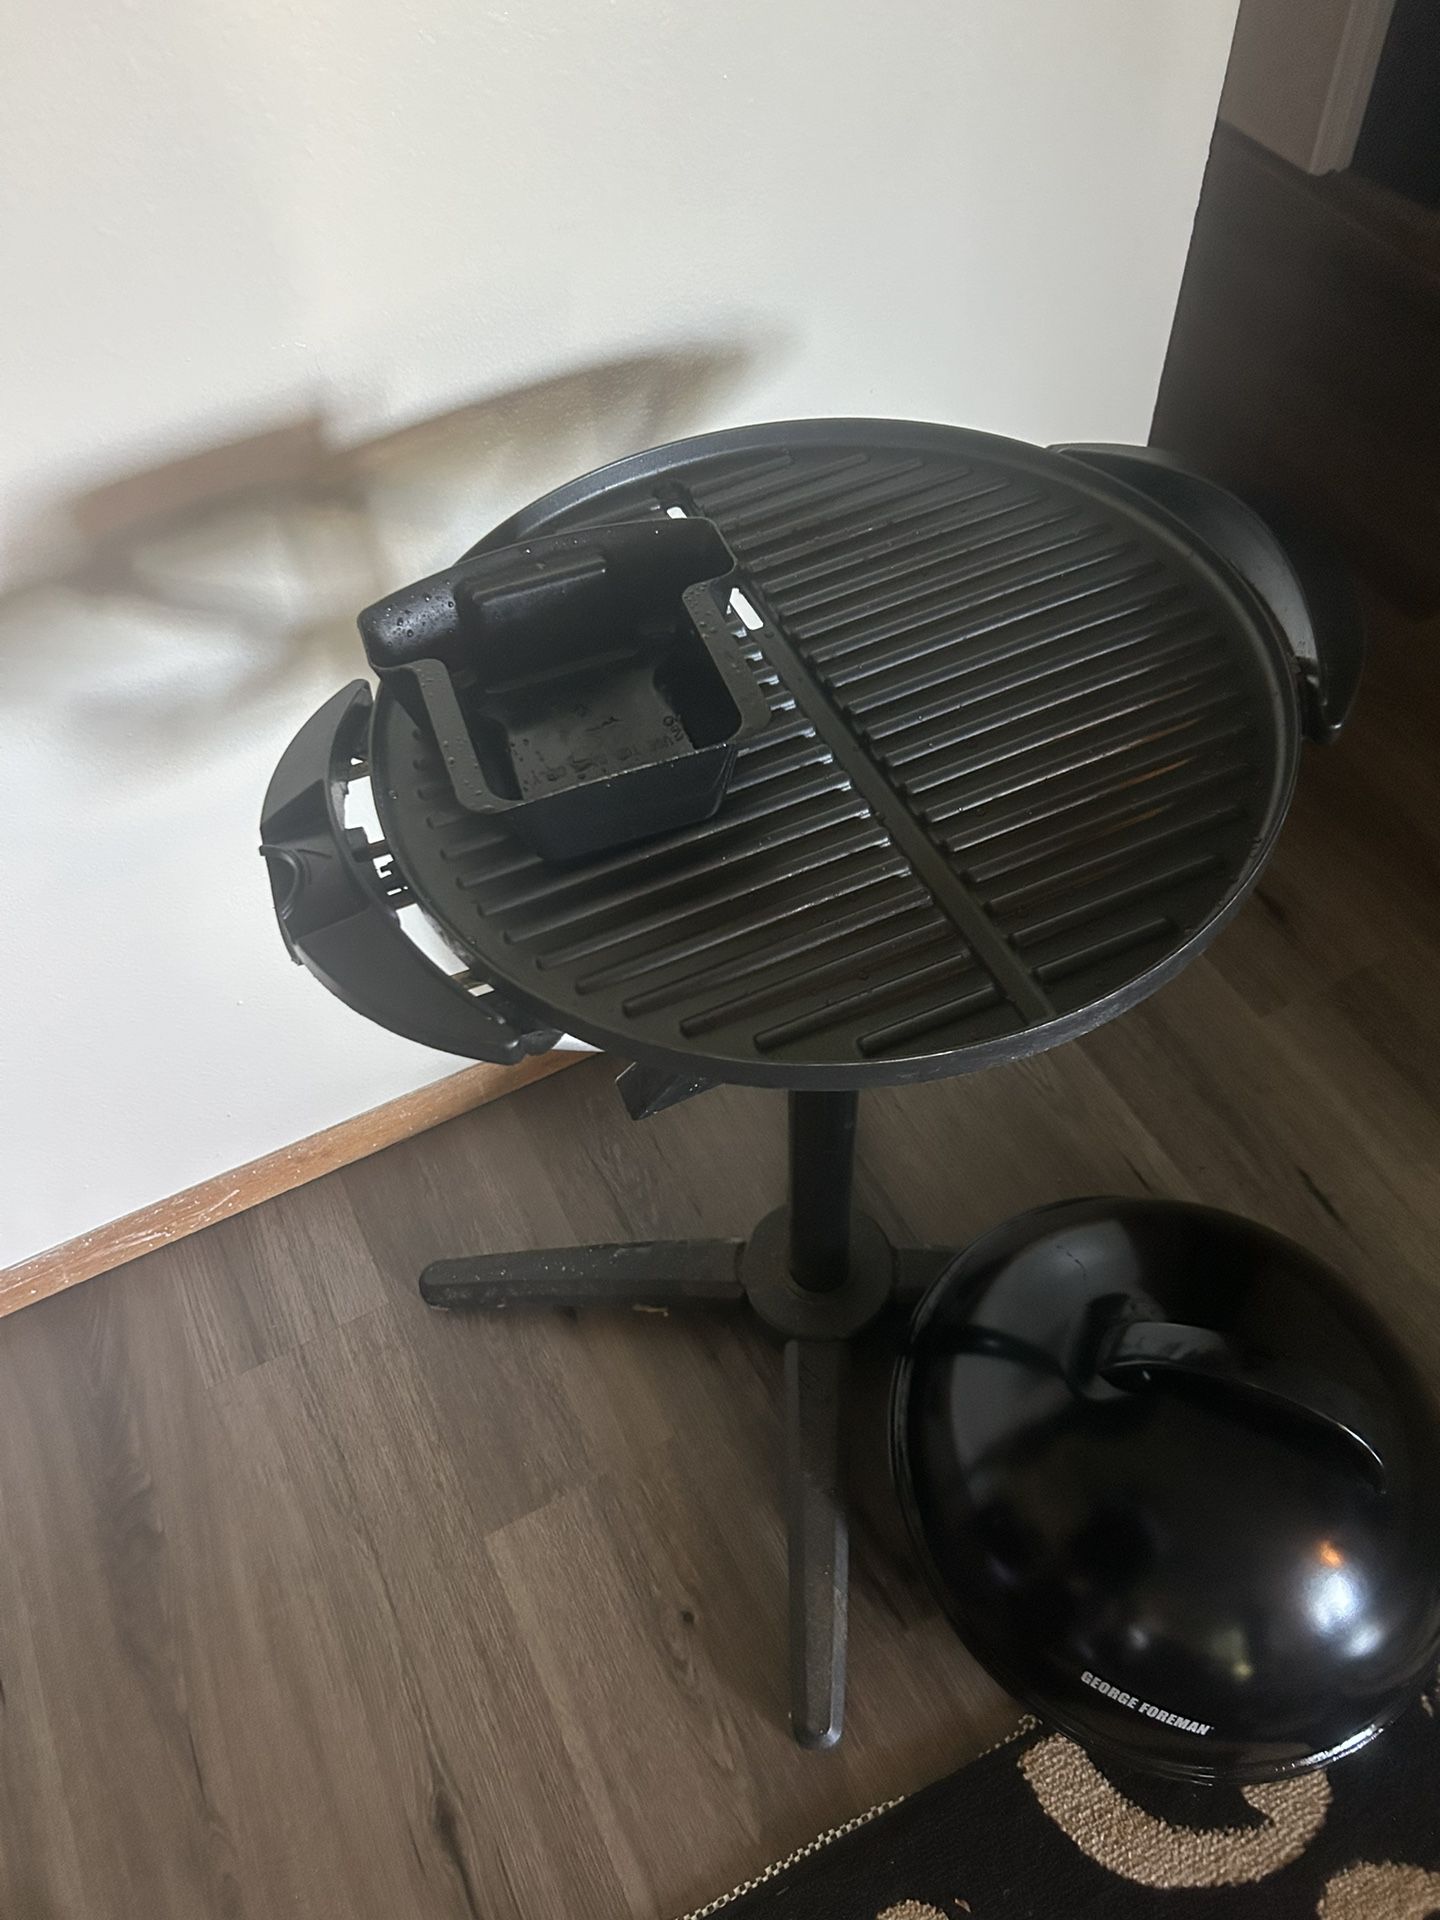 George Foreman Electric Grill 